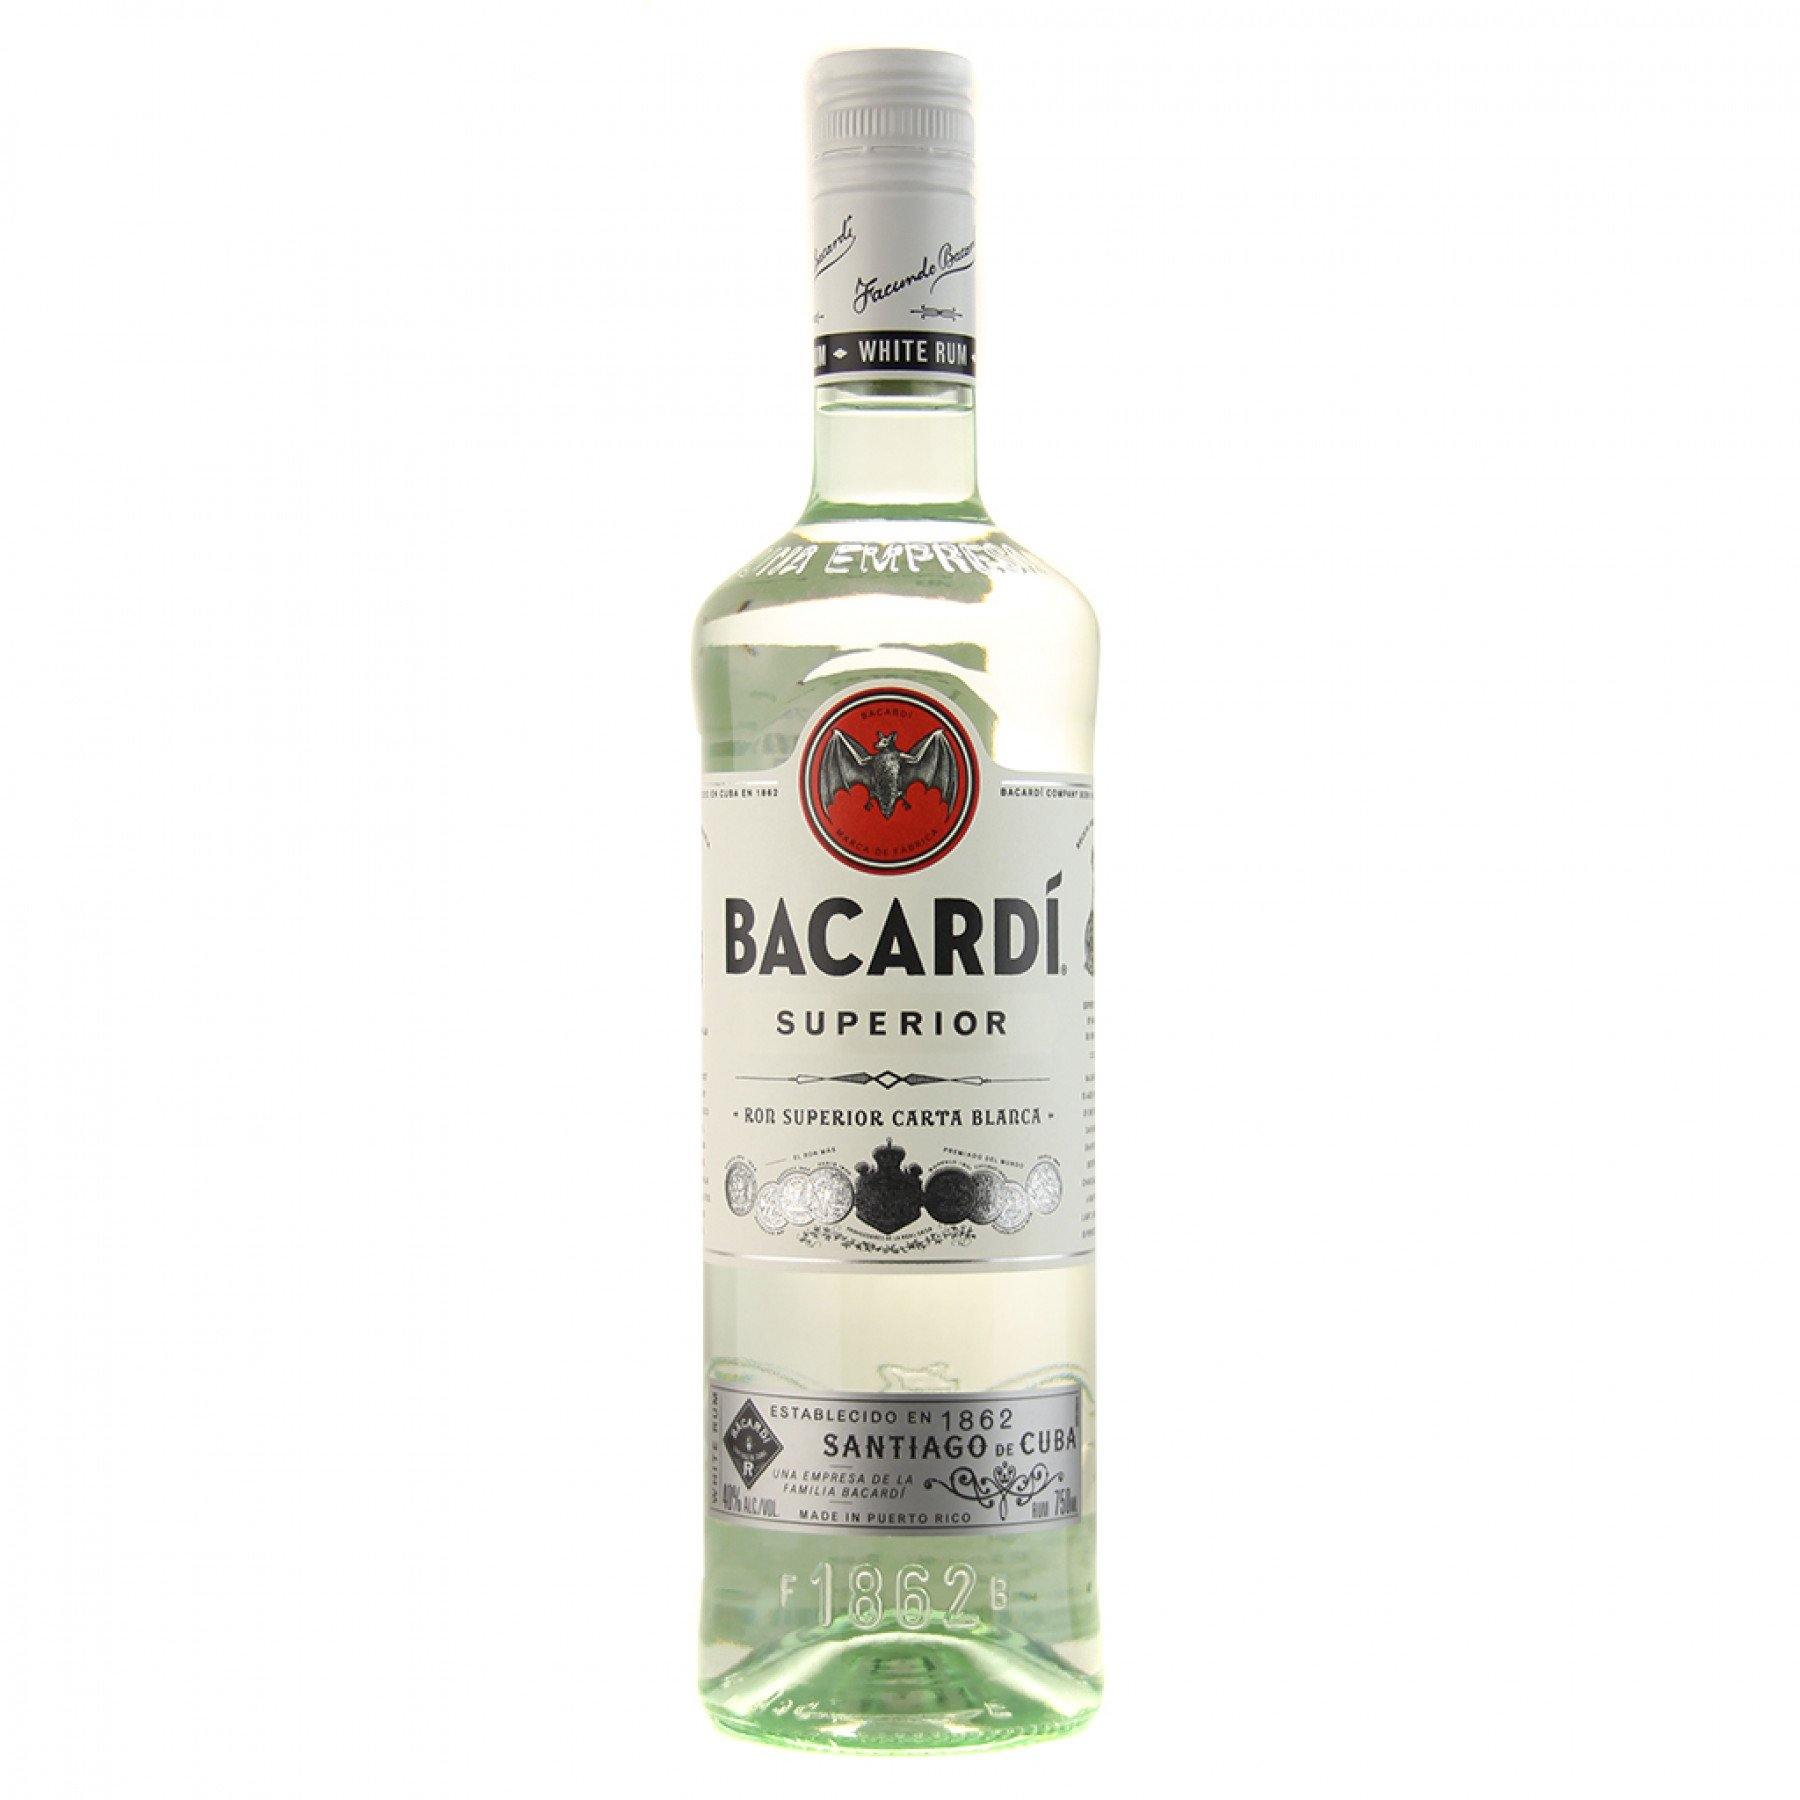 Buy Bacardi rum drinks Online. Checkout reviews and prices only at Whisky and Whiskey.com